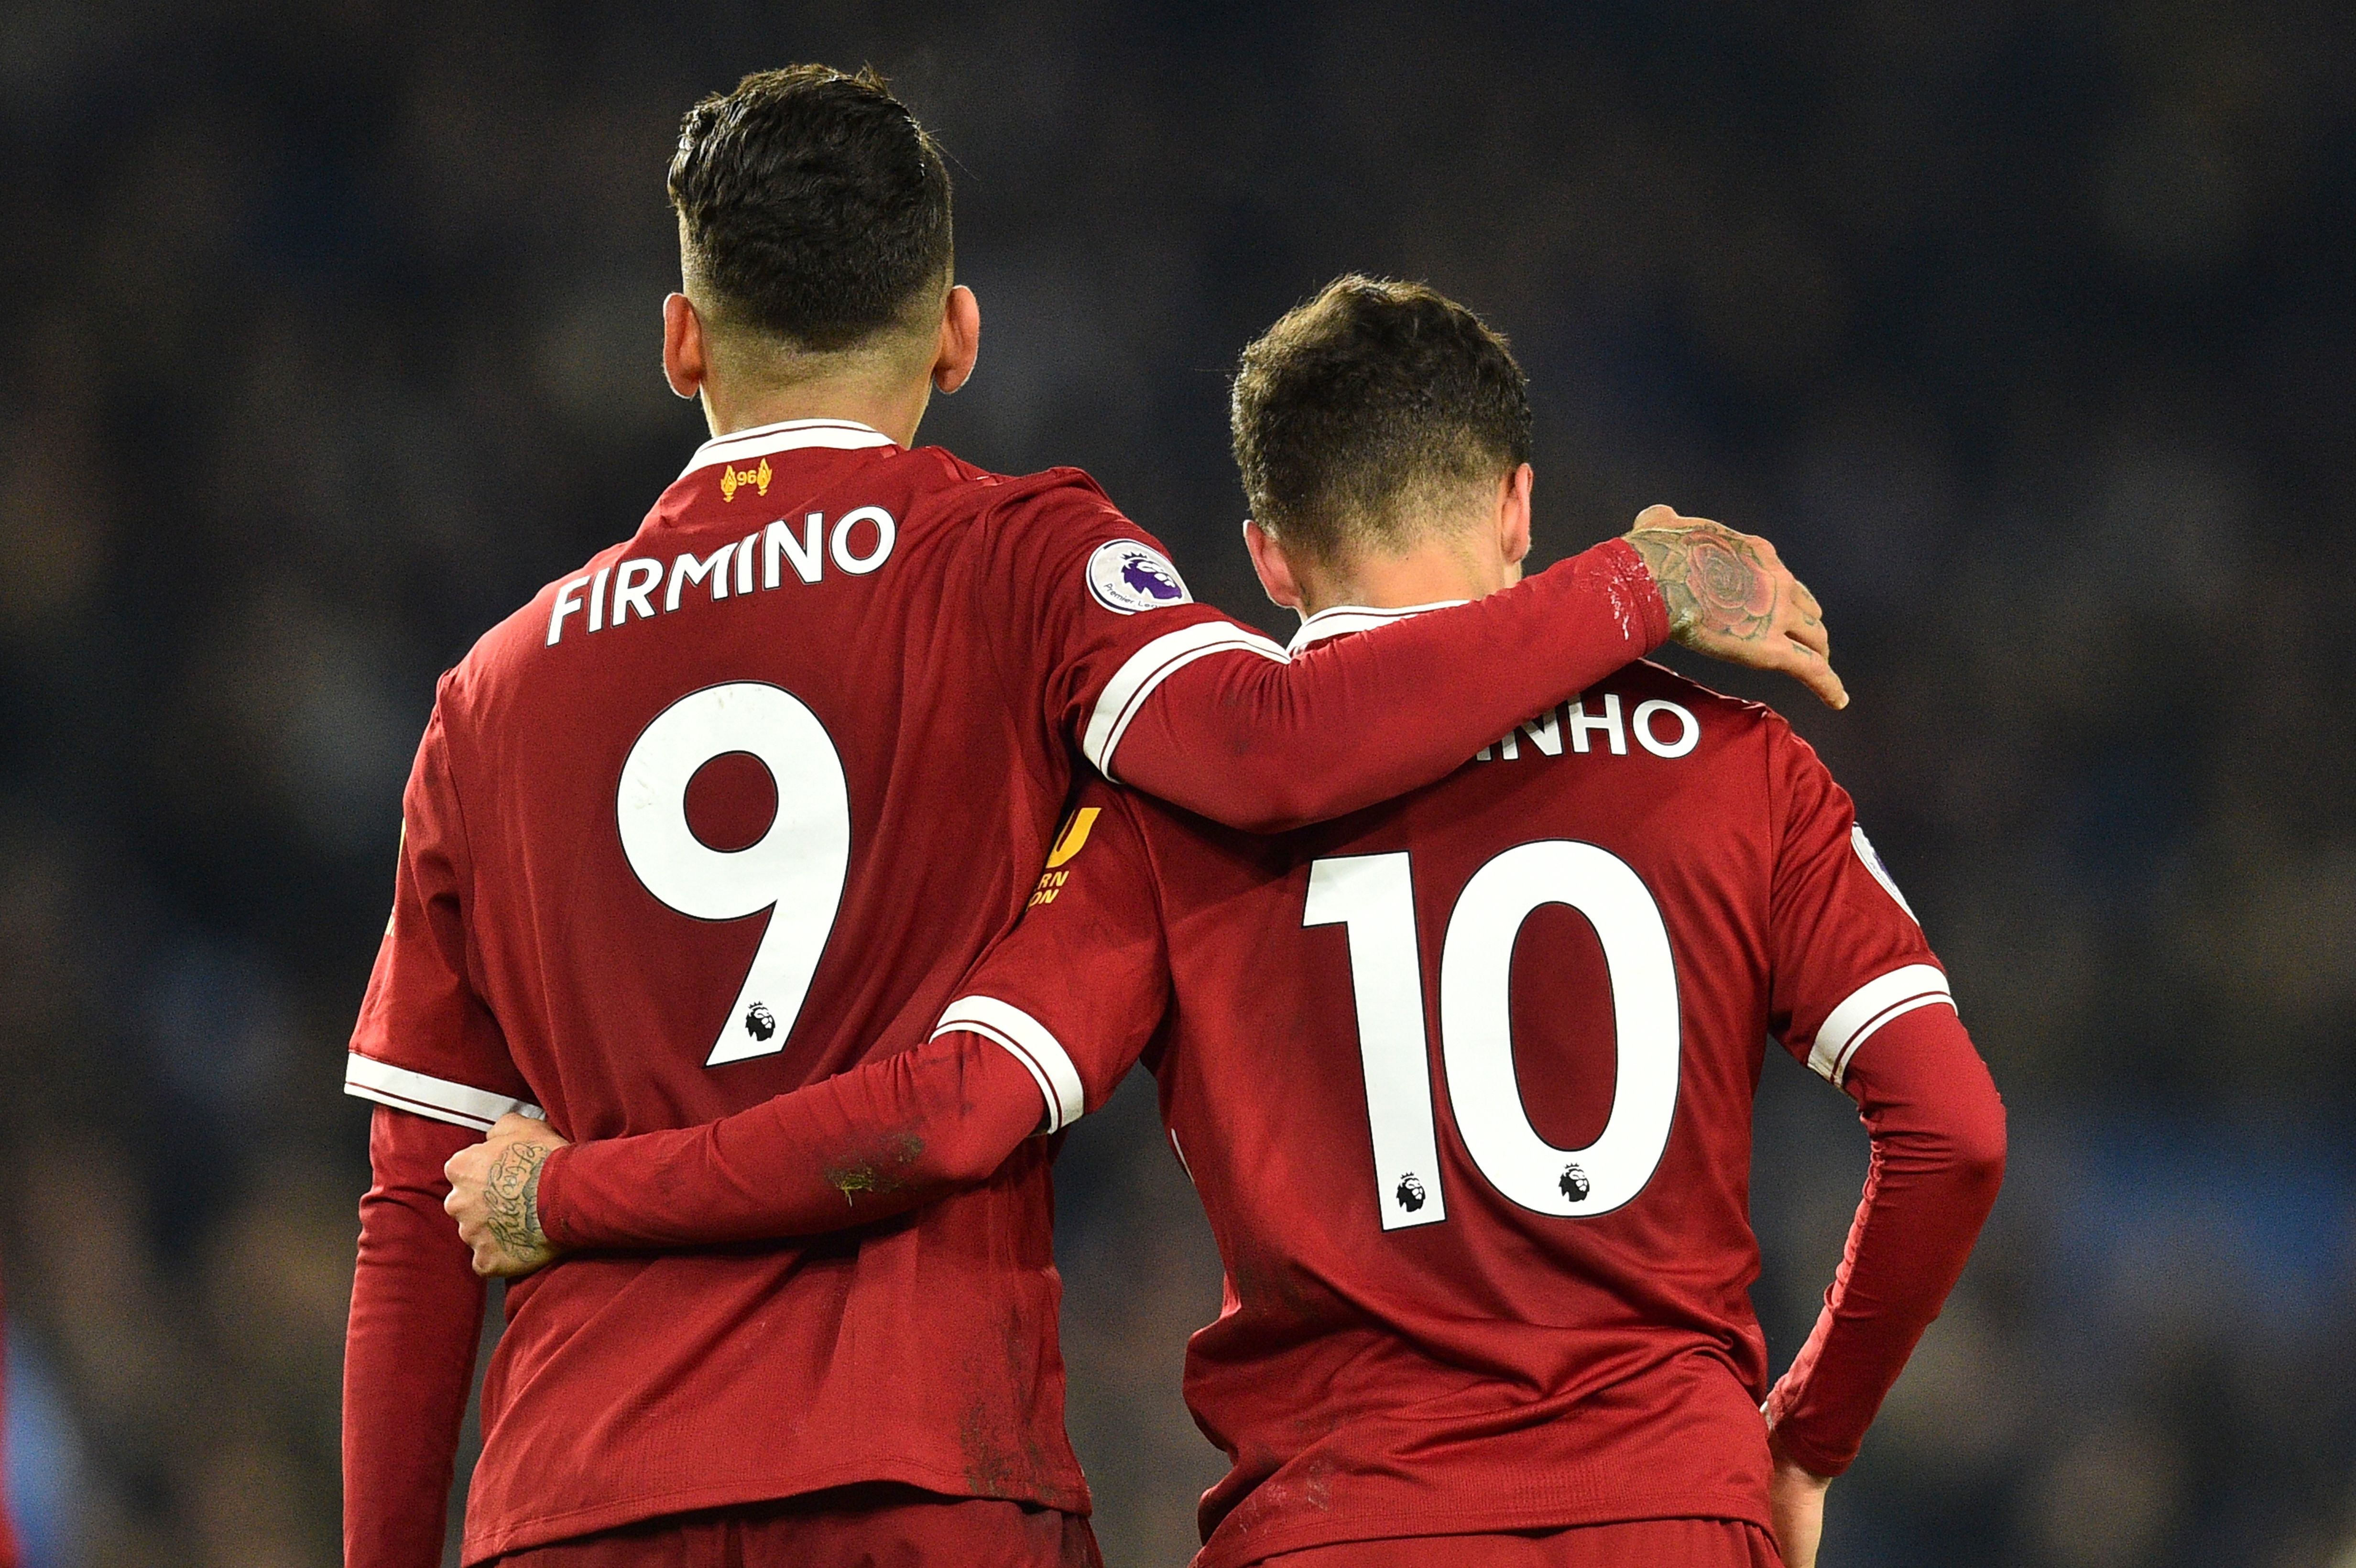 Liverpool's Brazilian midfielder Roberto Firmino (L) and Liverpool's Brazilian midfielder Philippe Coutinho (R) walk with arms around each other during the English Premier League football match between Brighton and Hove Albion and Liverpool at the American Express Community Stadium in Brighton, southern England on December 2, 2017. / AFP PHOTO / Glyn KIRK / RESTRICTED TO EDITORIAL USE. No use with unauthorized audio, video, data, fixture lists, club/league logos or 'live' services. Online in-match use limited to 75 images, no video emulation. No use in betting, games or single club/league/player publications.  /         (Photo credit should read GLYN KIRK/AFP/Getty Images)